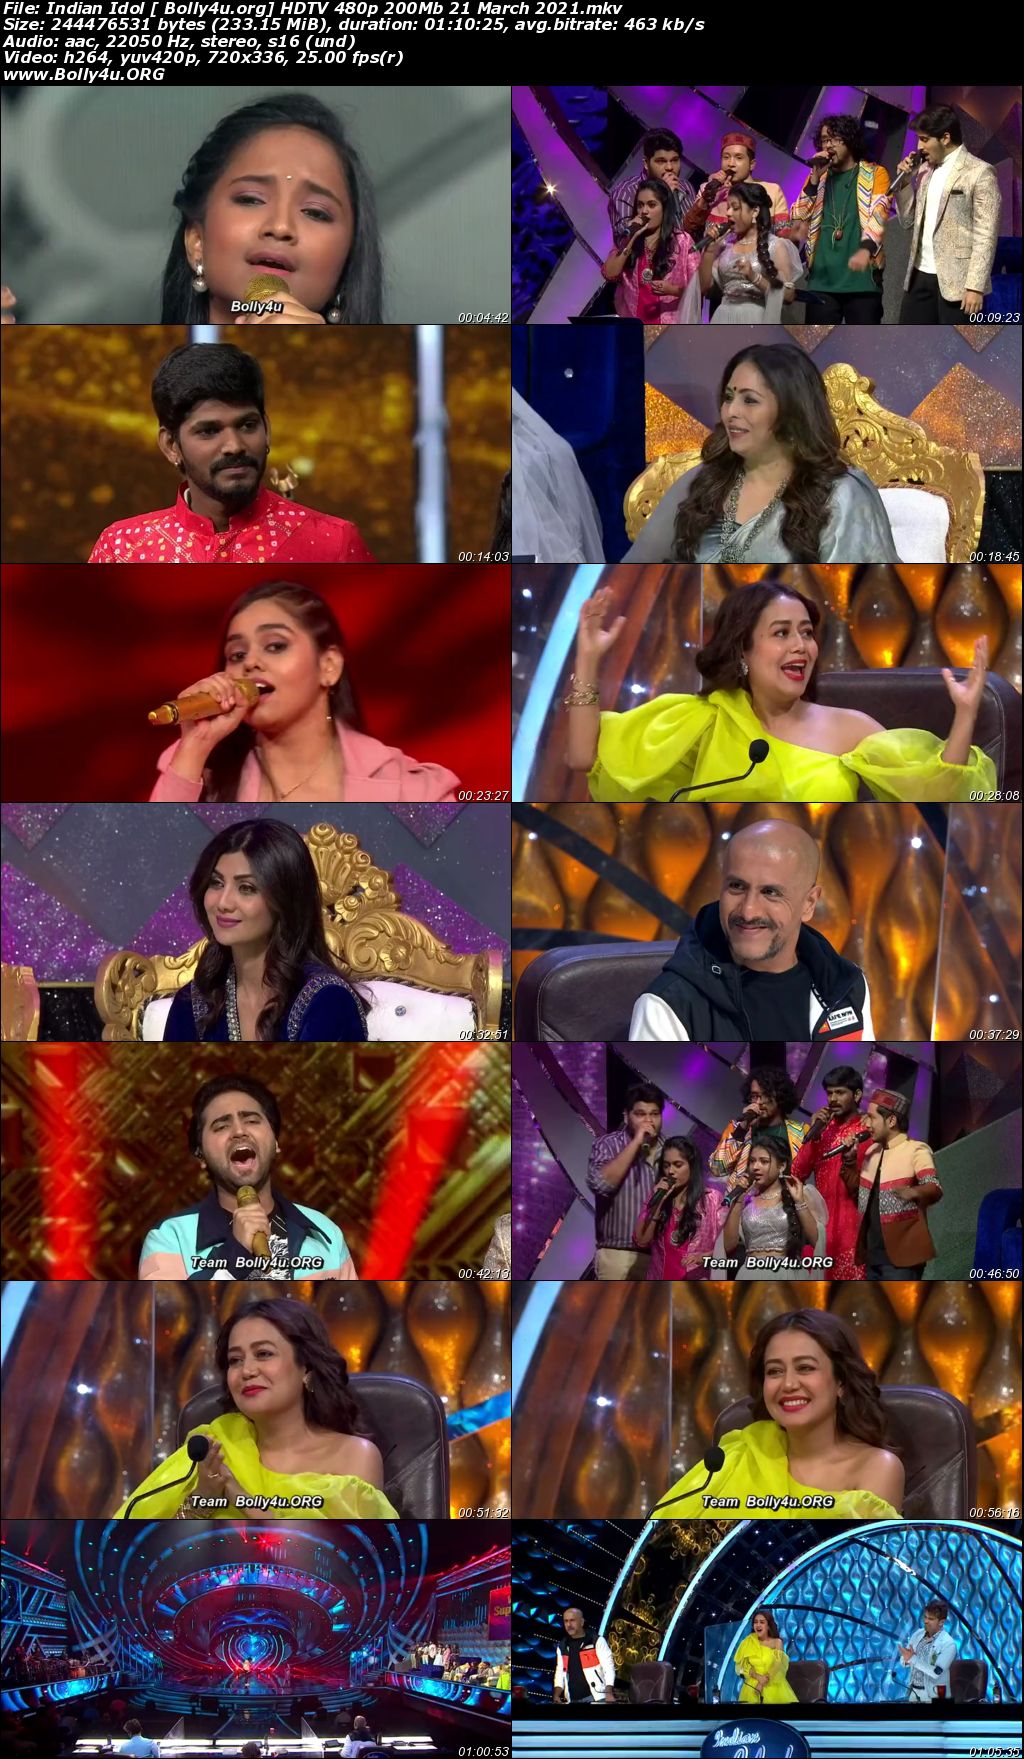 Indian Idol HDTV 480p 200Mb 21 March 2021 Download